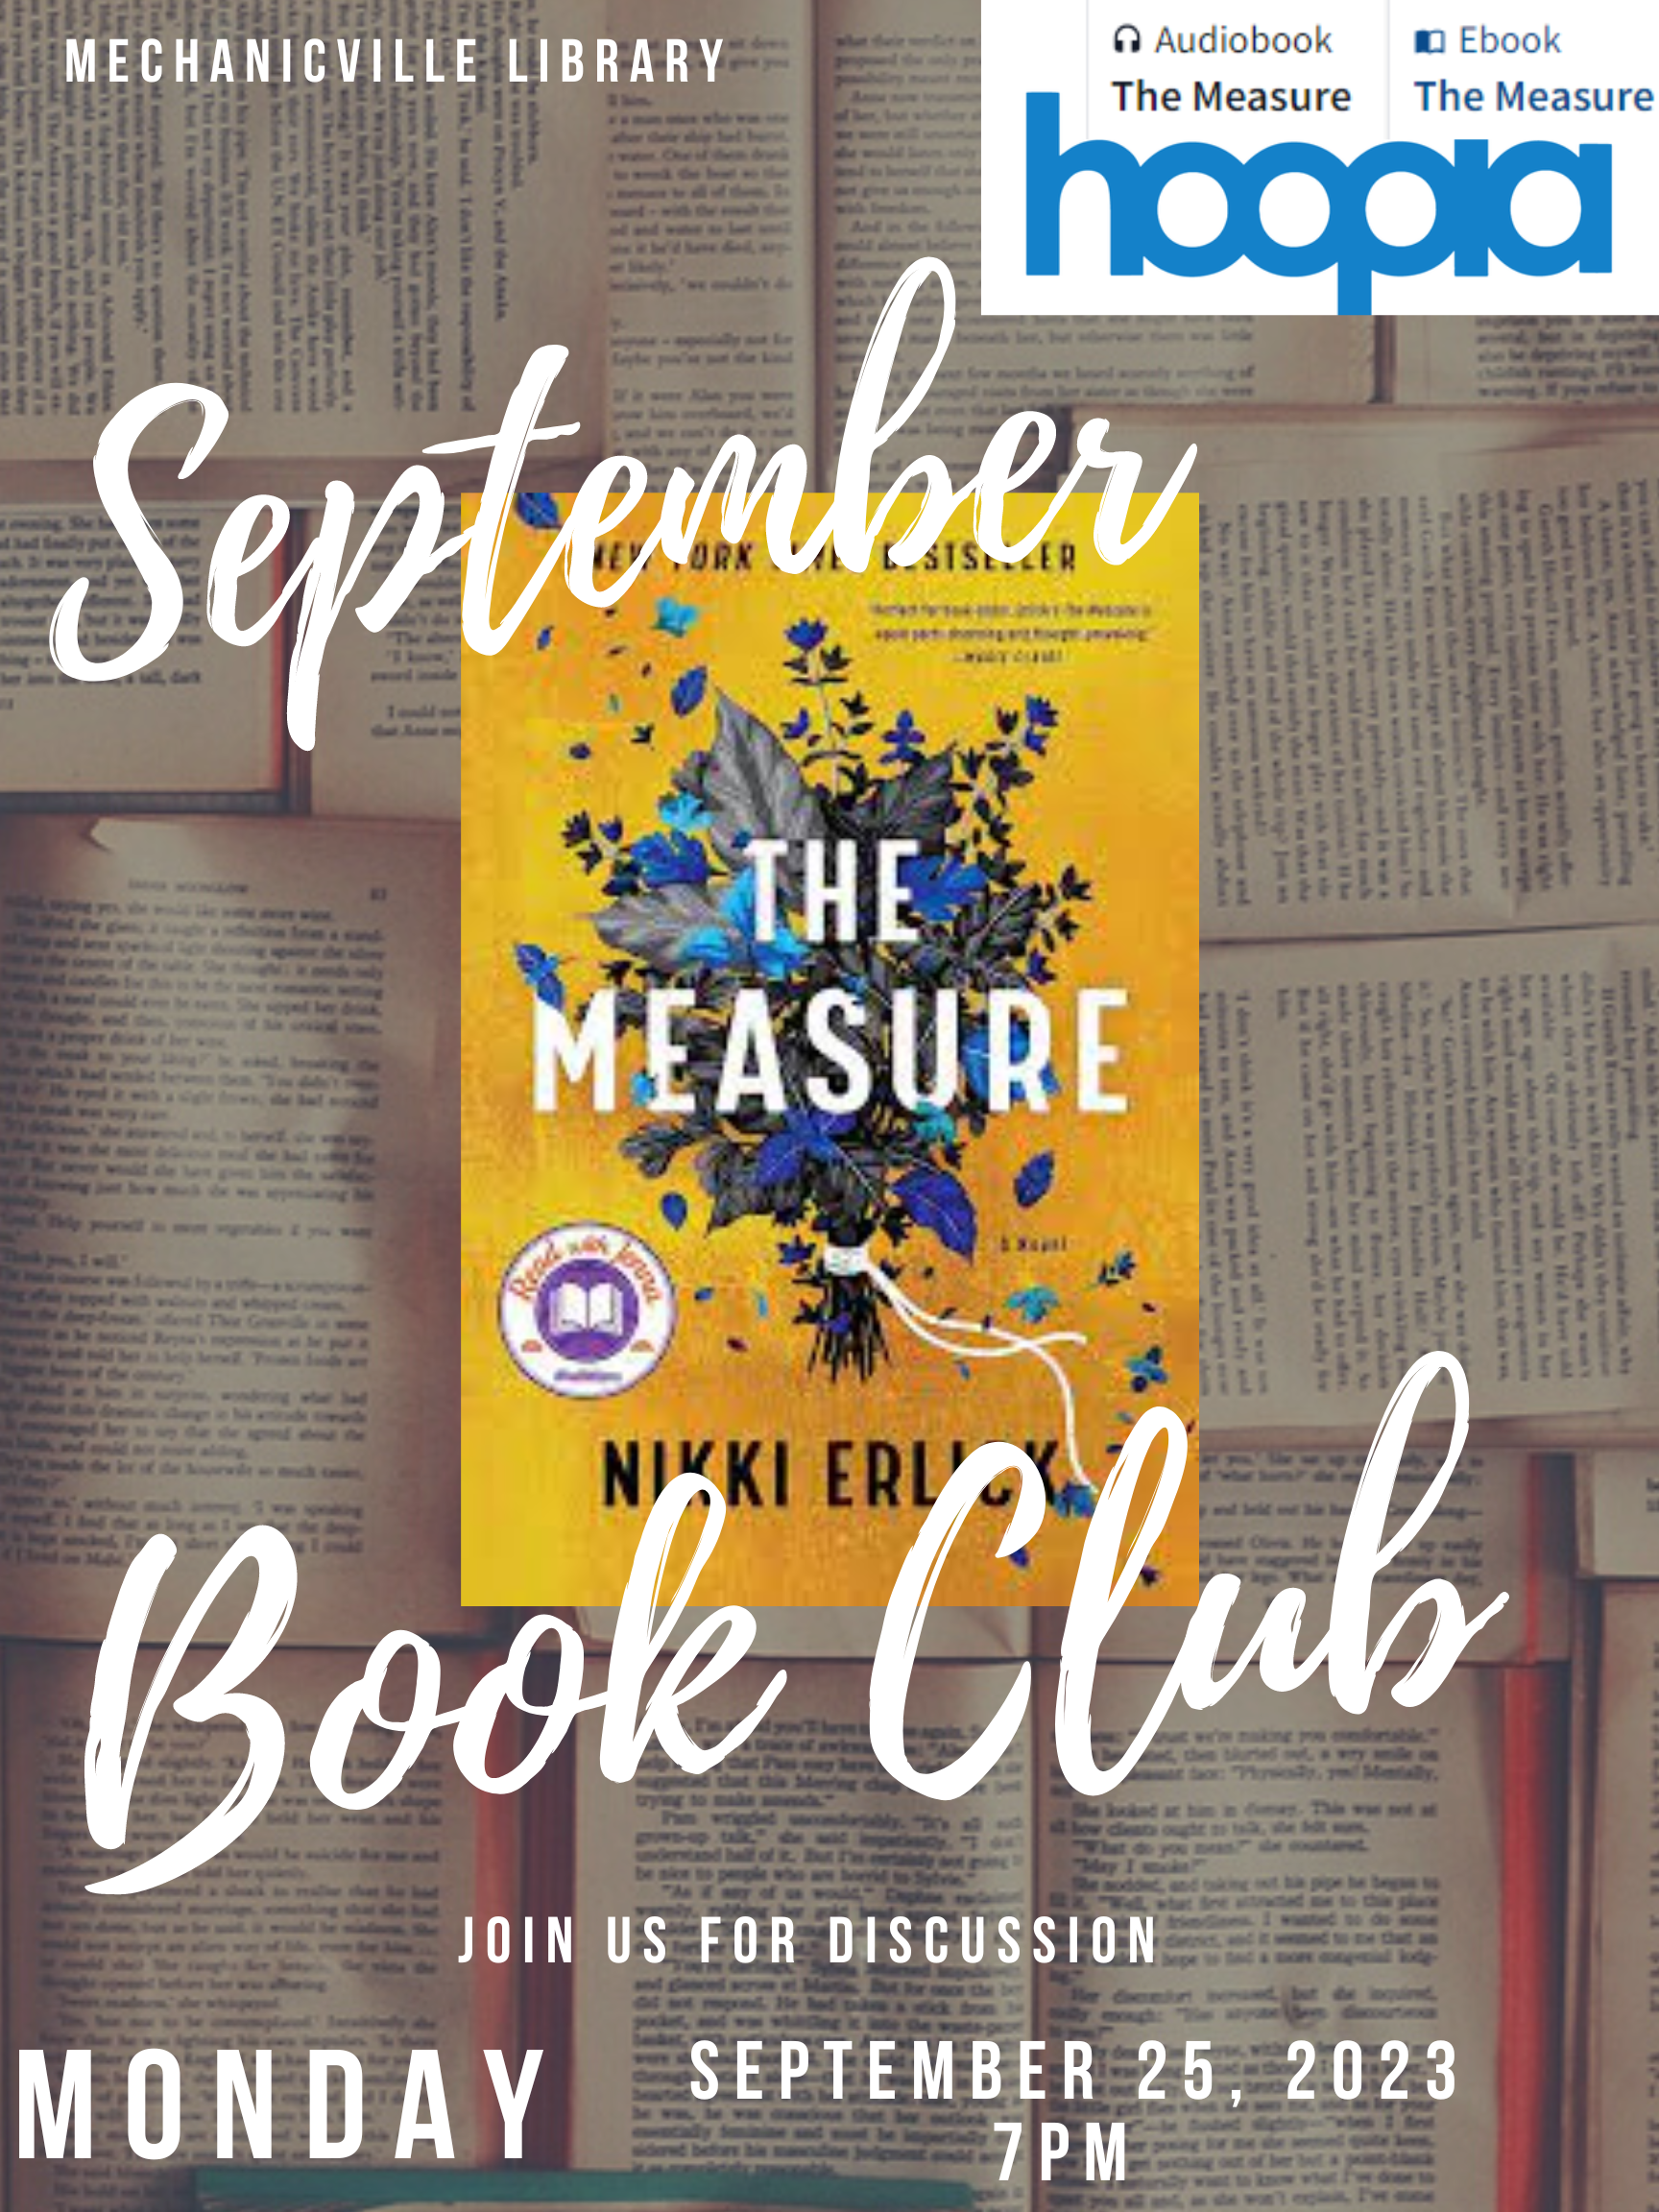 Adult Book Club - New members welcome! @ Mechanicville District Public Library | Mechanicville | New York | United States